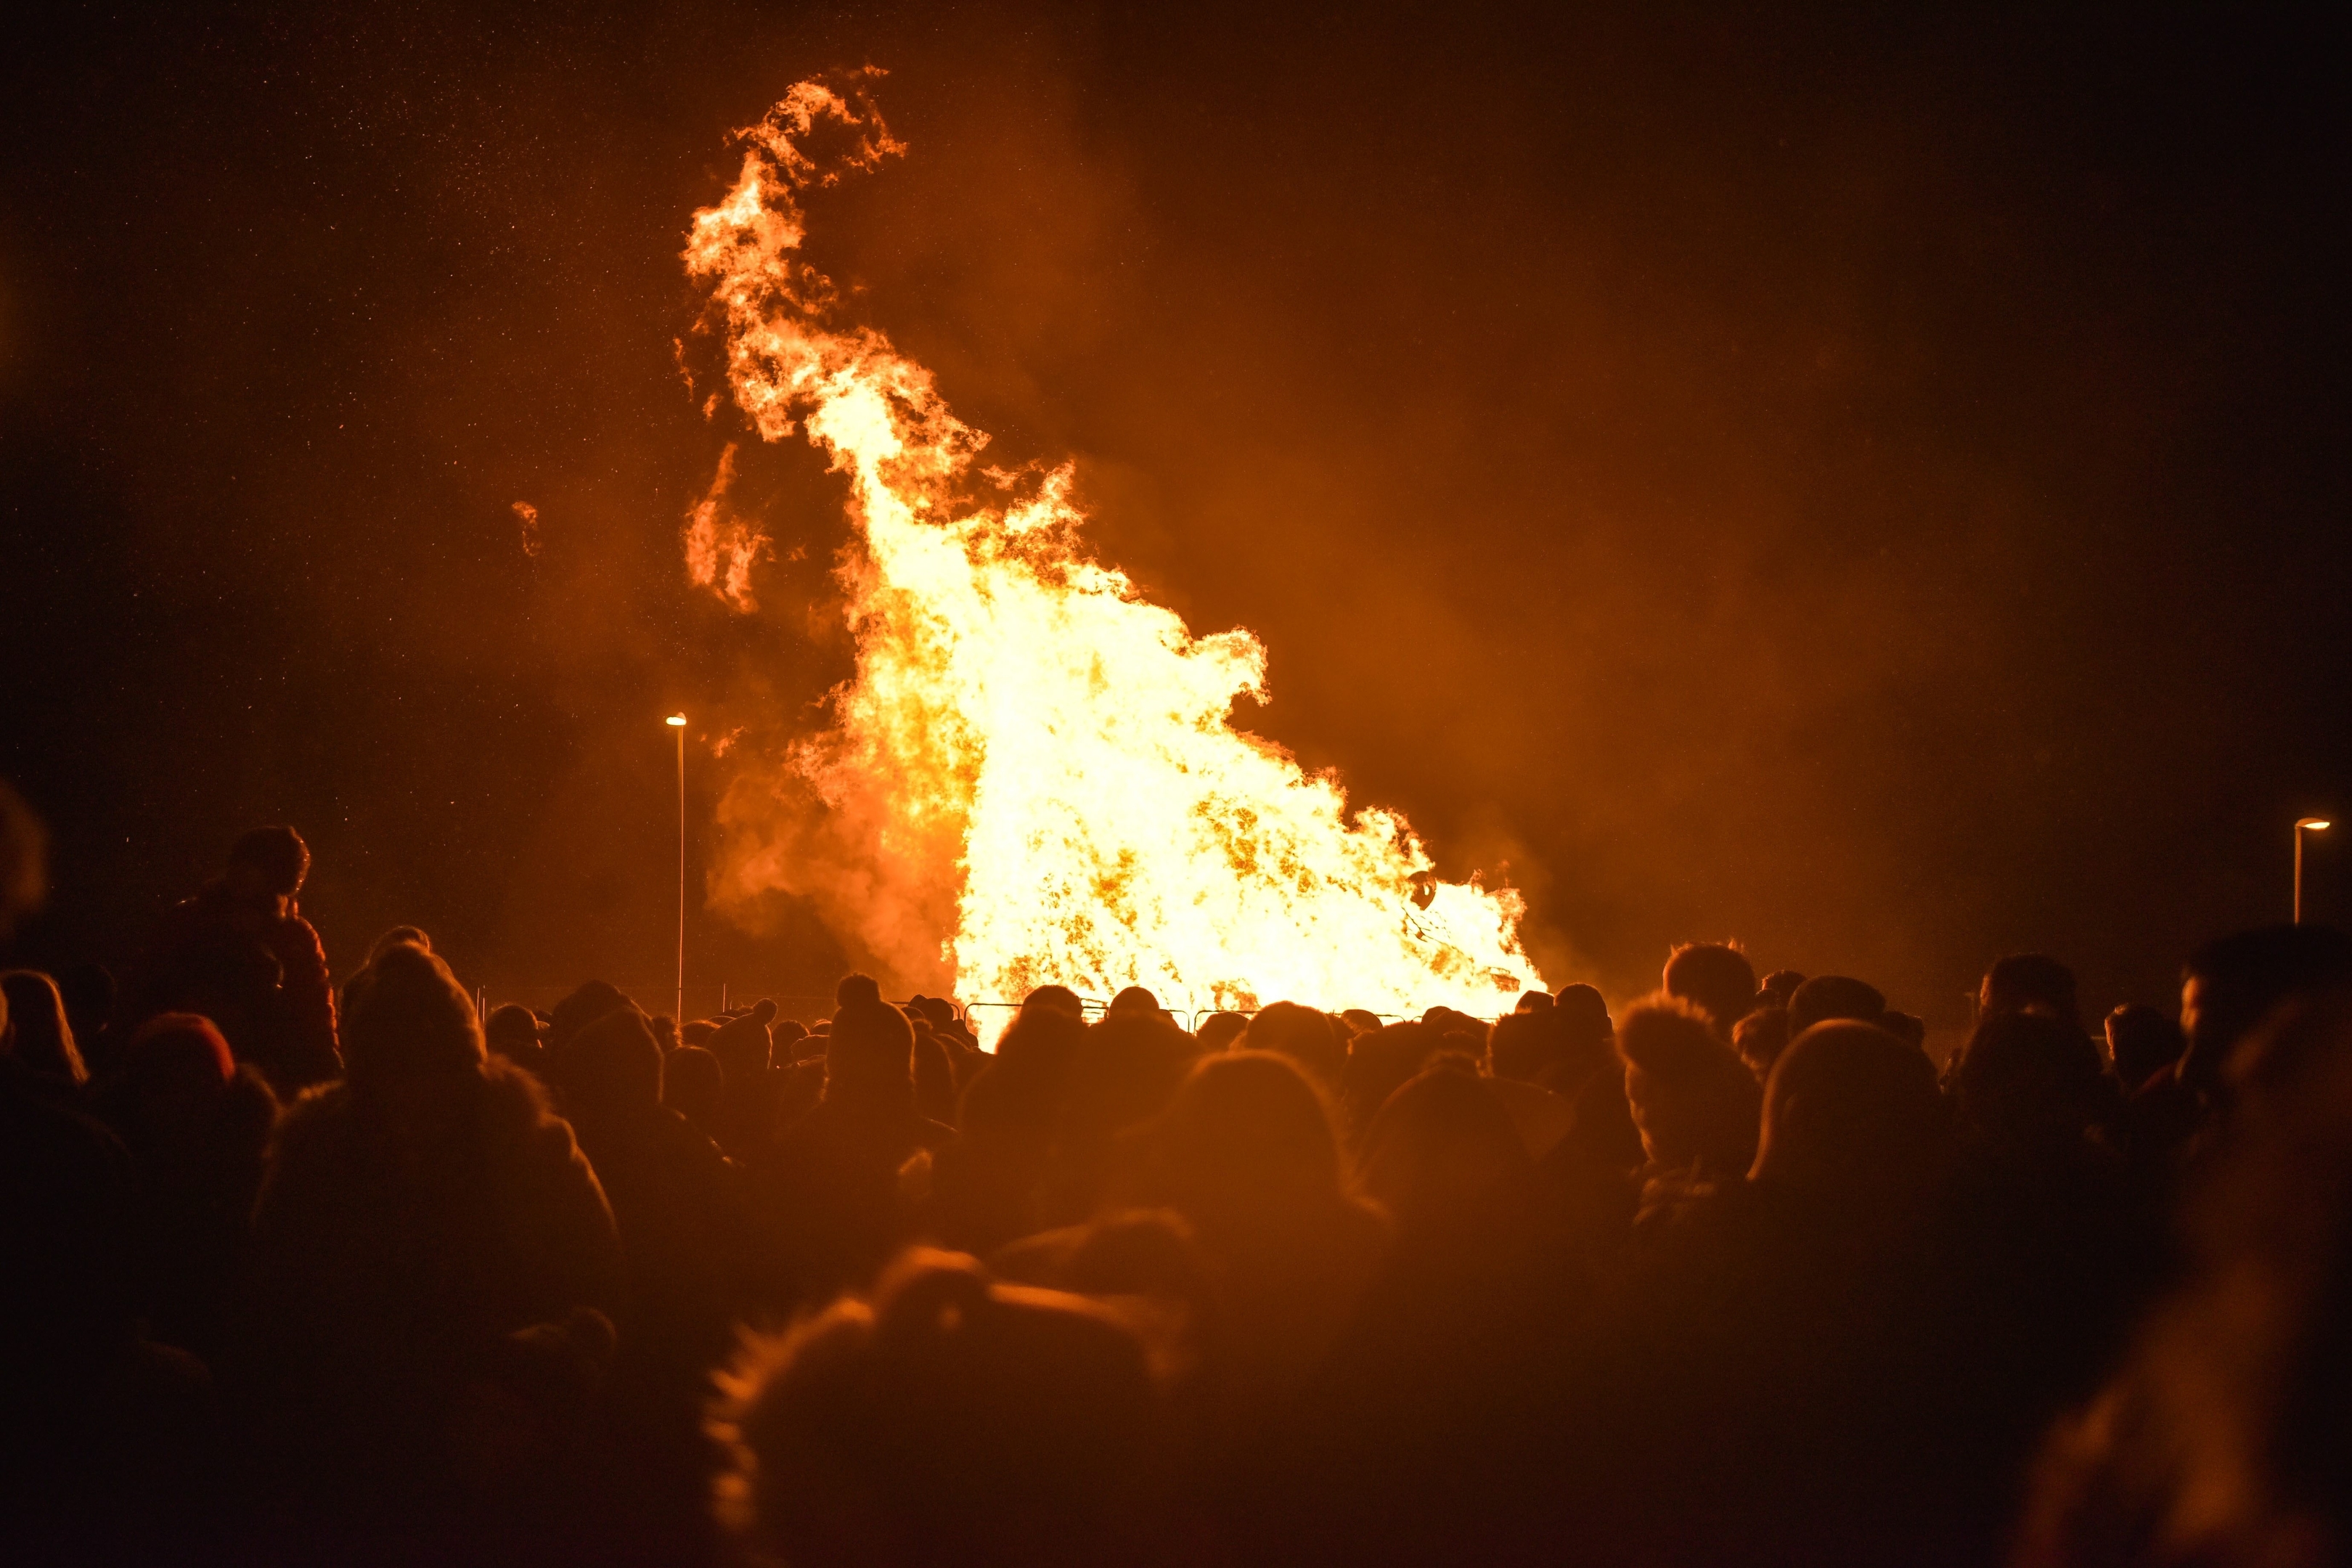 Members of the public gather to watch the bonfire in Peterhead, Aberdeenshire on November 05 2015. Events are being held across the country tonight, Thurs November 05, to mark Guy Fawkes Day. The bonfire in Peterhead, Aberdeenshire, which is created by pallets and other large wooden objects, is thought to be one of the biggest in Scotland. It's estimated to stand at over 20 feet tall.